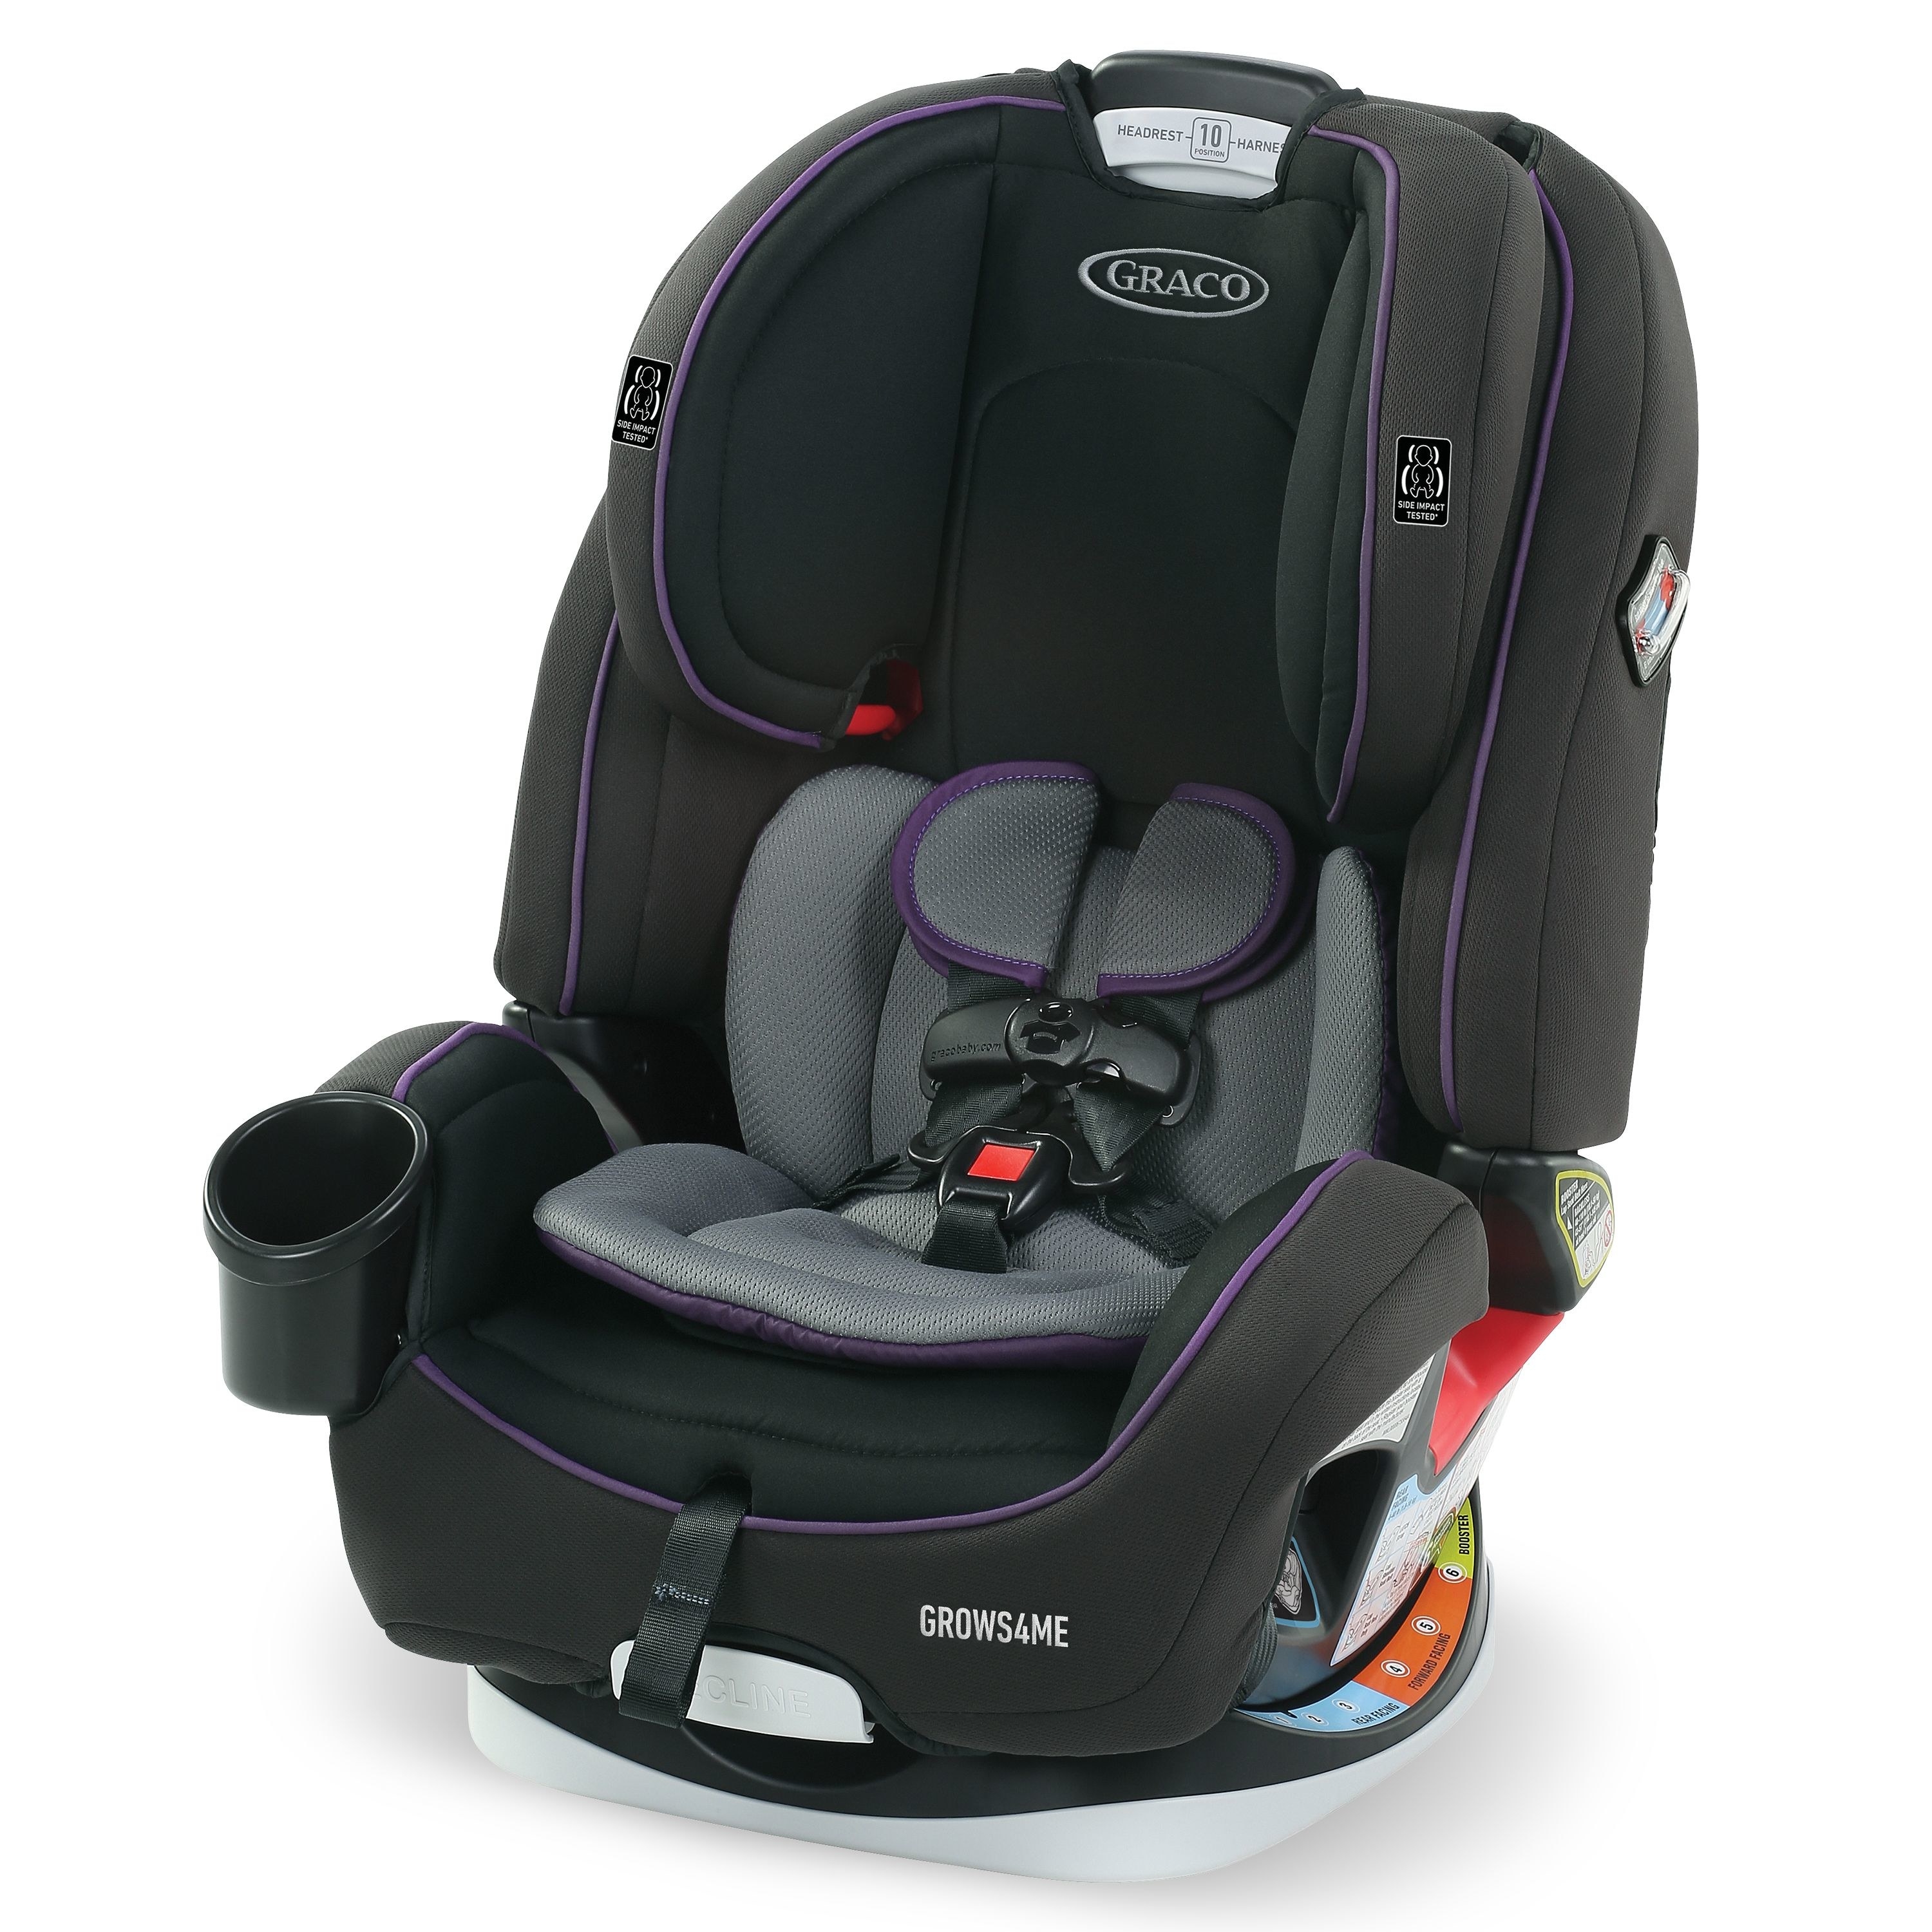 The car seat